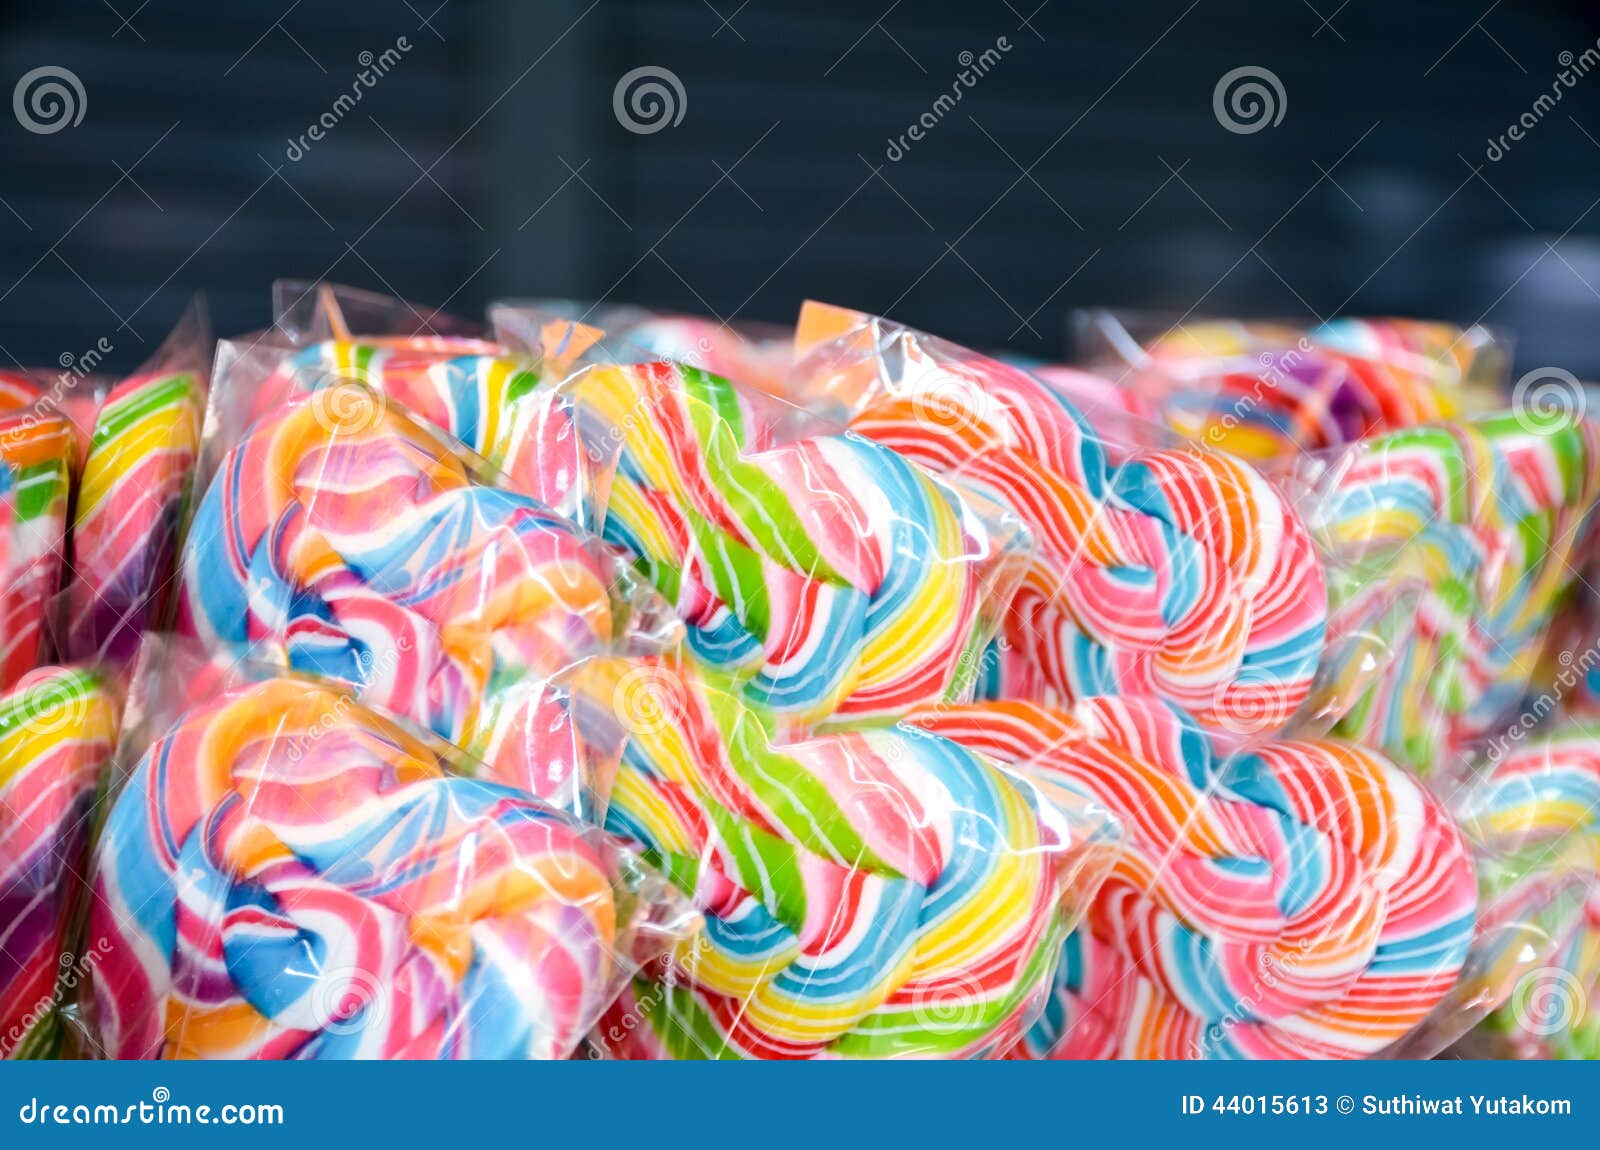 Colorful Spiral Lollipop Isolated On A Colored Background Stock Image ...